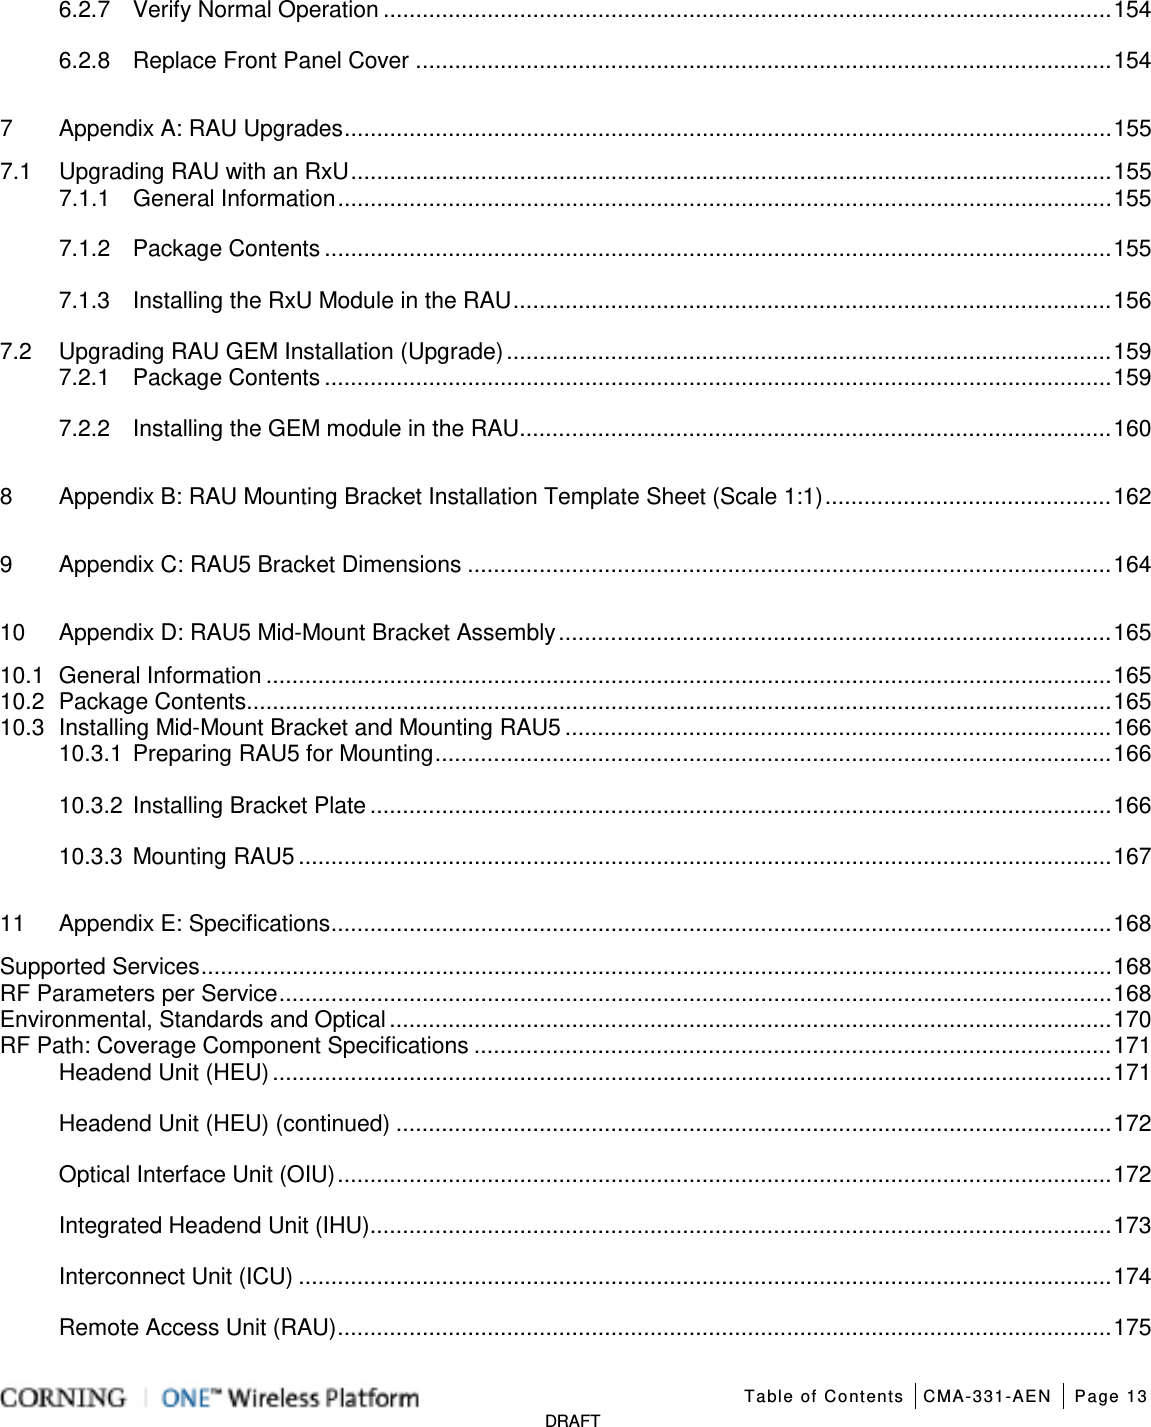   Table of Contents CMA-331-AEN Page 13   DRAFT 6.2.7 Verify Normal Operation ................................................................................................................ 154 6.2.8 Replace Front Panel Cover ........................................................................................................... 154 7 Appendix A: RAU Upgrades ...................................................................................................................... 155 7.1 Upgrading RAU with an RxU ..................................................................................................................... 155 7.1.1 General Information ....................................................................................................................... 155 7.1.2 Package Contents ......................................................................................................................... 155 7.1.3 Installing the RxU Module in the RAU ............................................................................................ 156 7.2 Upgrading RAU GEM Installation (Upgrade) ............................................................................................. 159 7.2.1 Package Contents ......................................................................................................................... 159 7.2.2 Installing the GEM module in the RAU ........................................................................................... 160 8 Appendix B: RAU Mounting Bracket Installation Template Sheet (Scale 1:1) ............................................ 162 9 Appendix C: RAU5 Bracket Dimensions ................................................................................................... 164 10 Appendix D: RAU5 Mid-Mount Bracket Assembly ..................................................................................... 165 10.1 General Information .................................................................................................................................. 165 10.2 Package Contents ..................................................................................................................................... 165 10.3 Installing Mid-Mount Bracket and Mounting RAU5 .................................................................................... 166 10.3.1 Preparing RAU5 for Mounting ........................................................................................................ 166 10.3.2 Installing Bracket Plate .................................................................................................................. 166 10.3.3 Mounting RAU5 ............................................................................................................................. 167 11 Appendix E: Specifications ........................................................................................................................ 168 Supported Services ............................................................................................................................................ 168 RF Parameters per Service ................................................................................................................................ 168 Environmental, Standards and Optical ............................................................................................................... 170 RF Path: Coverage Component Specifications .................................................................................................. 171 Headend Unit (HEU) ................................................................................................................................. 171 Headend Unit (HEU) (continued) .............................................................................................................. 172 Optical Interface Unit (OIU) ....................................................................................................................... 172 Integrated Headend Unit (IHU) .................................................................................................................. 173 Interconnect Unit (ICU) ............................................................................................................................. 174 Remote Access Unit (RAU) ....................................................................................................................... 175 